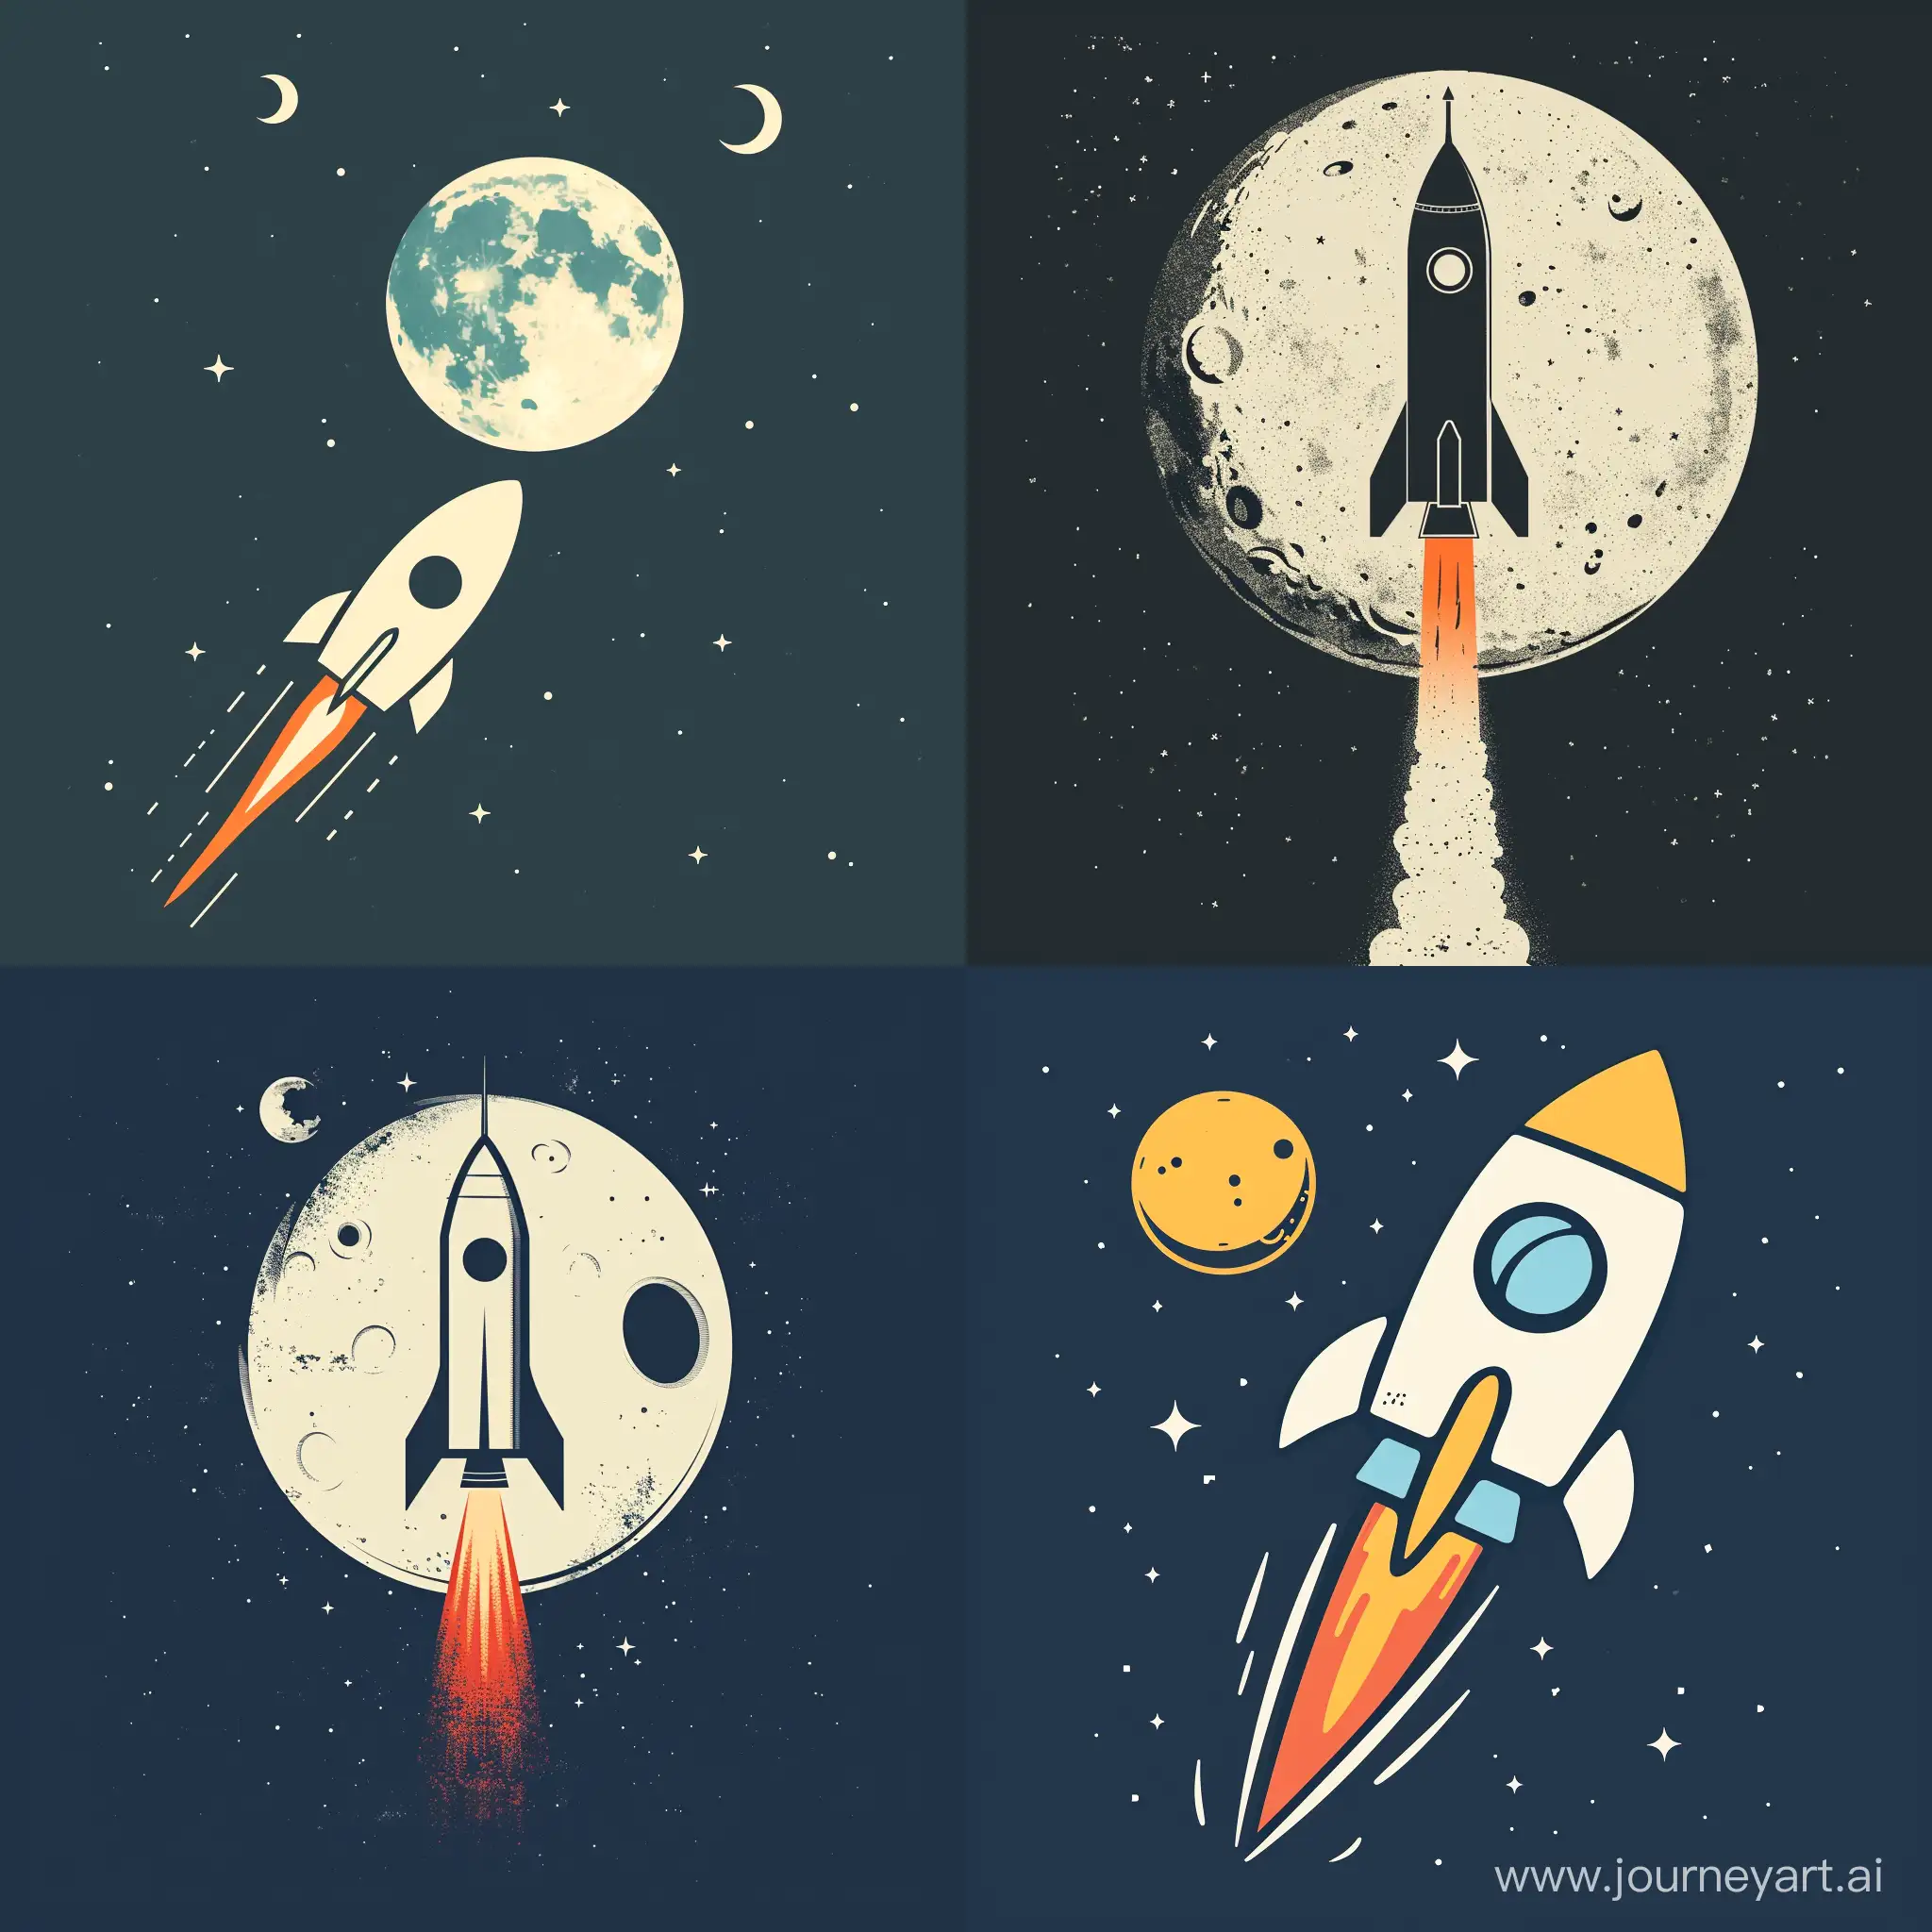 outbrain company logo going to the moon